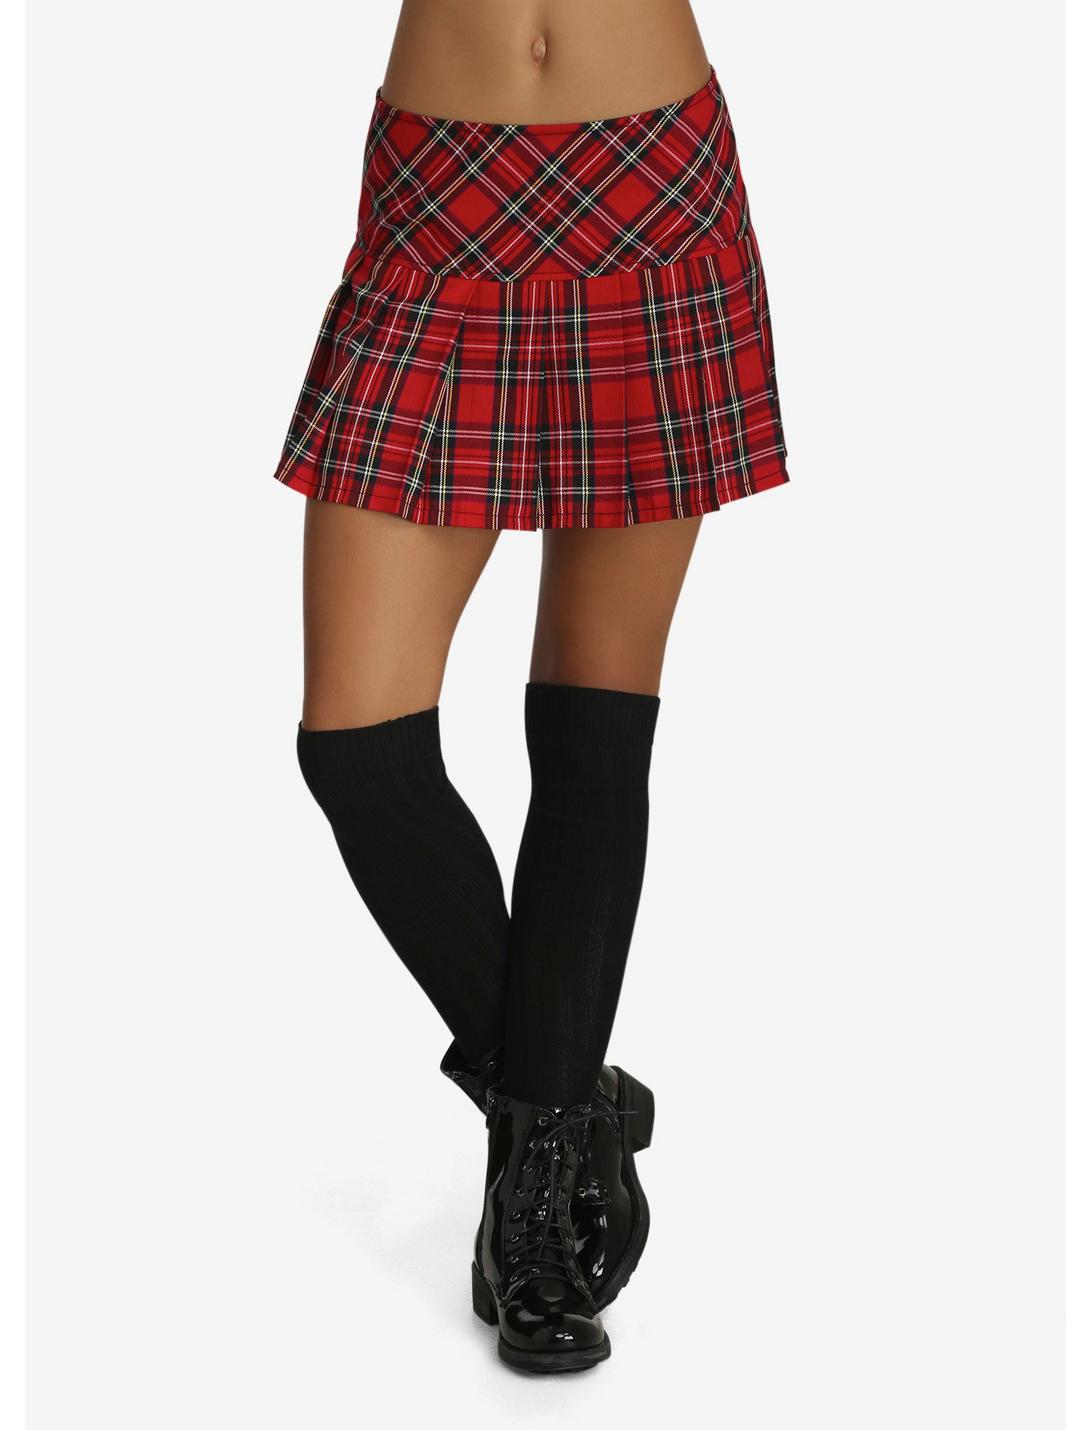 Tripp NYC Plaid Pleated Skirt, RED, hi-res